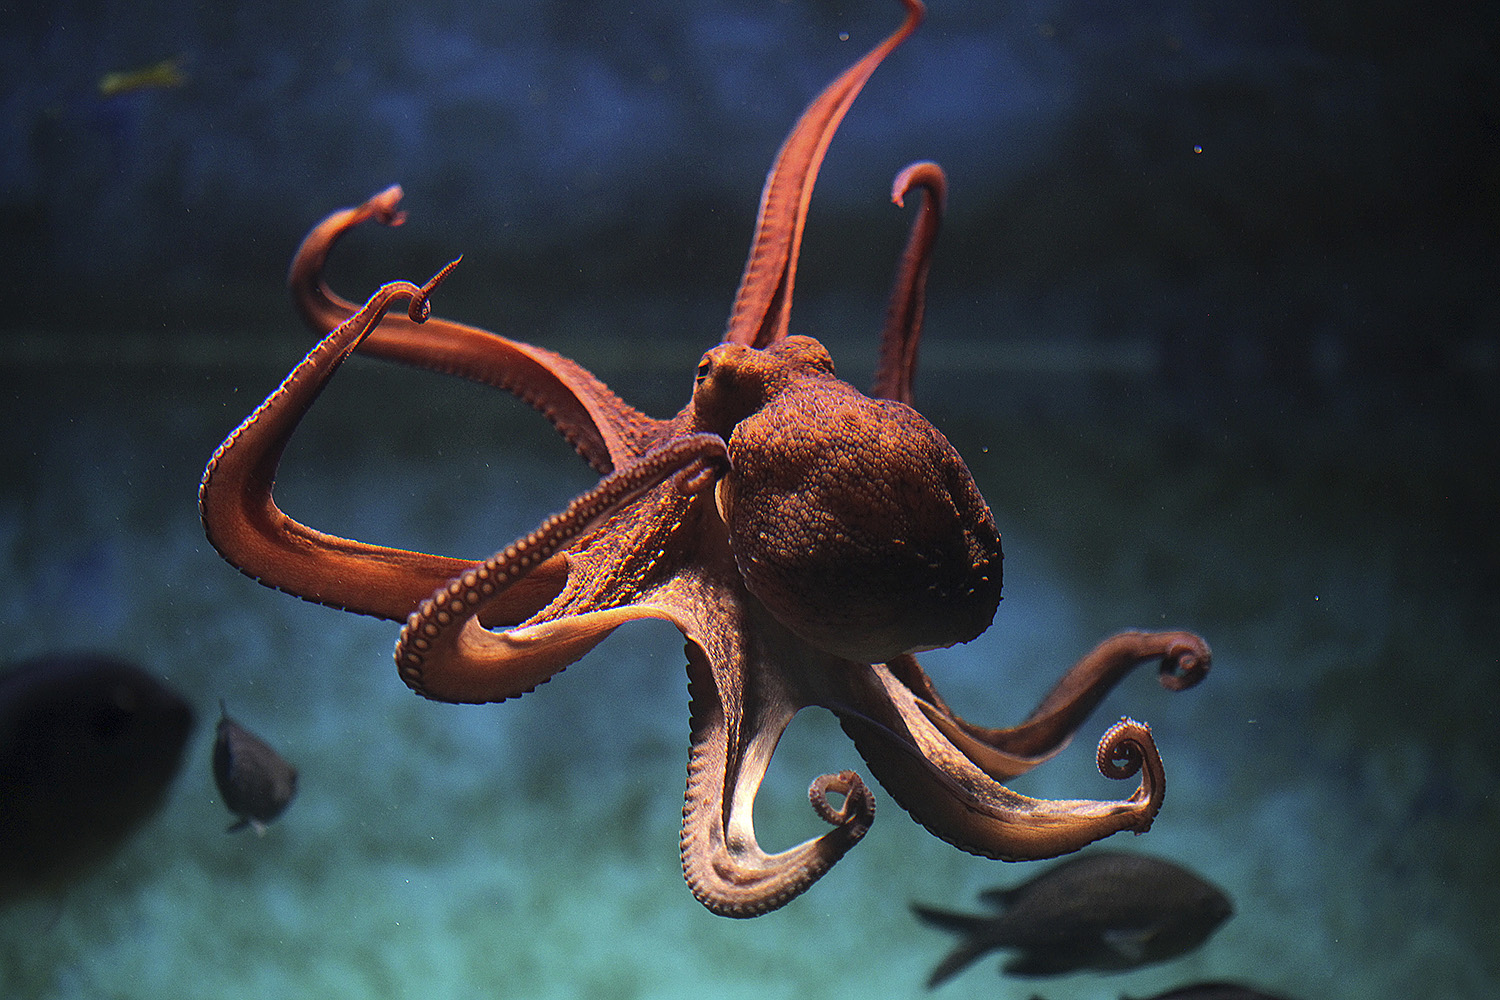 of octopus ranging from the largest Giant Pacific octopus to the smallest i...